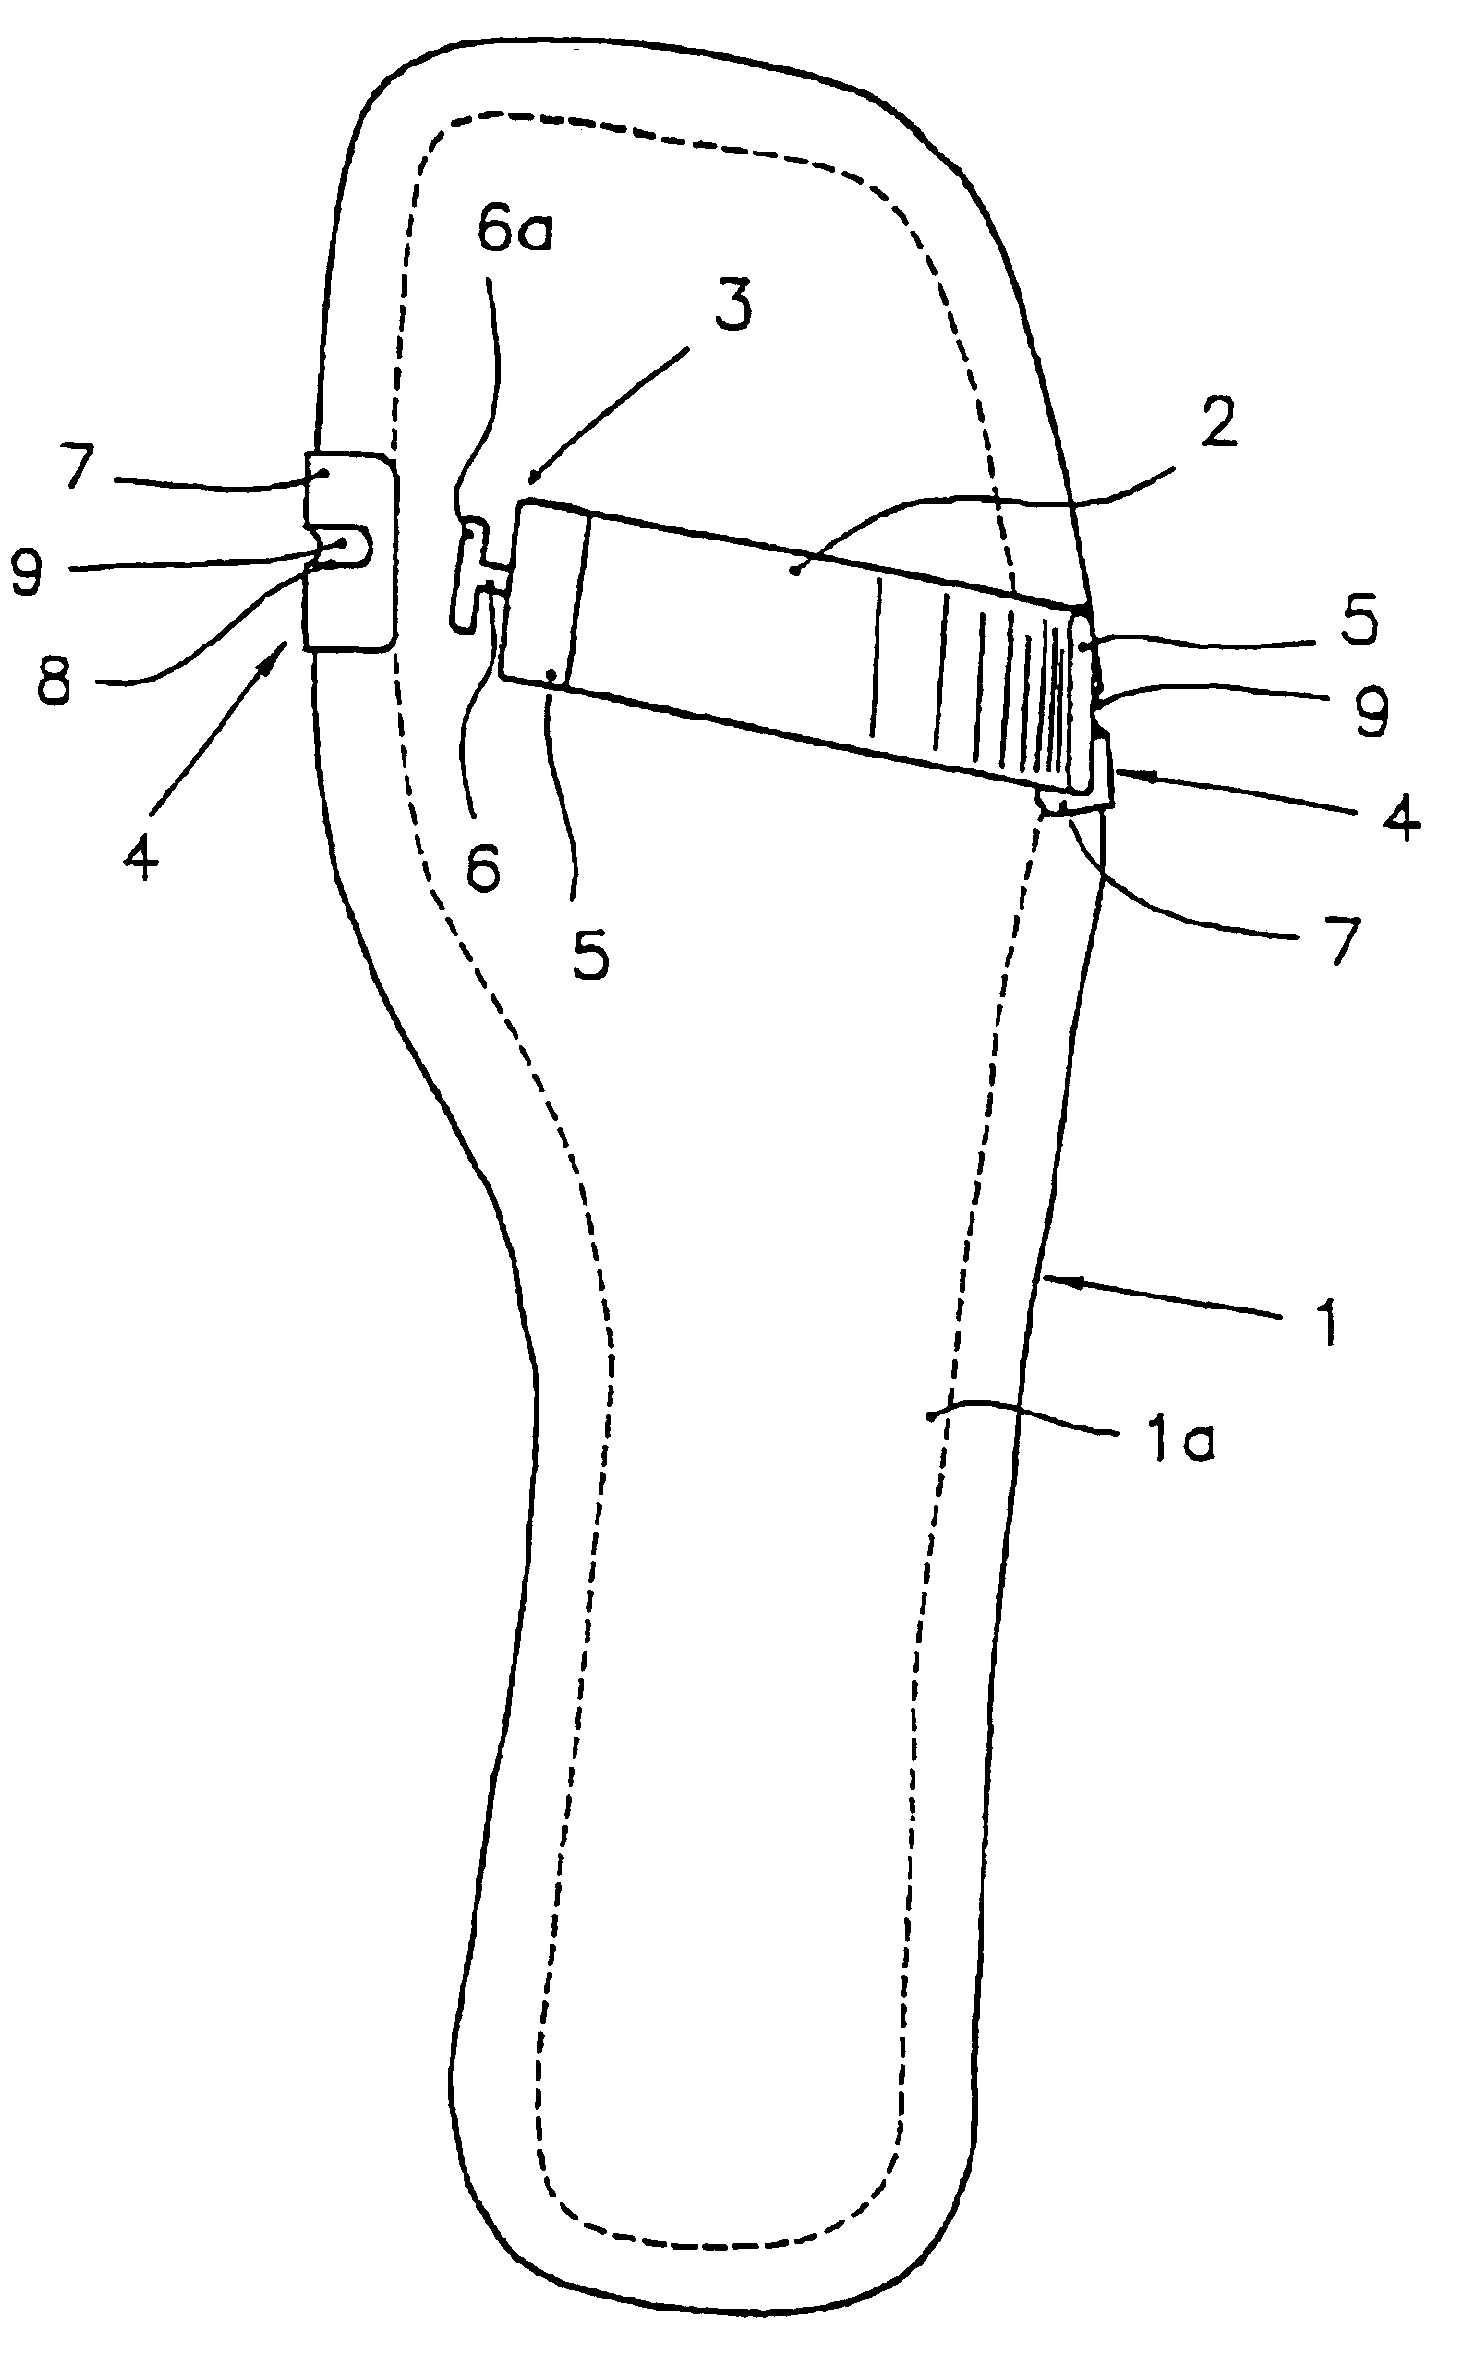 Footwear, such as a sandal, with replaceable upper